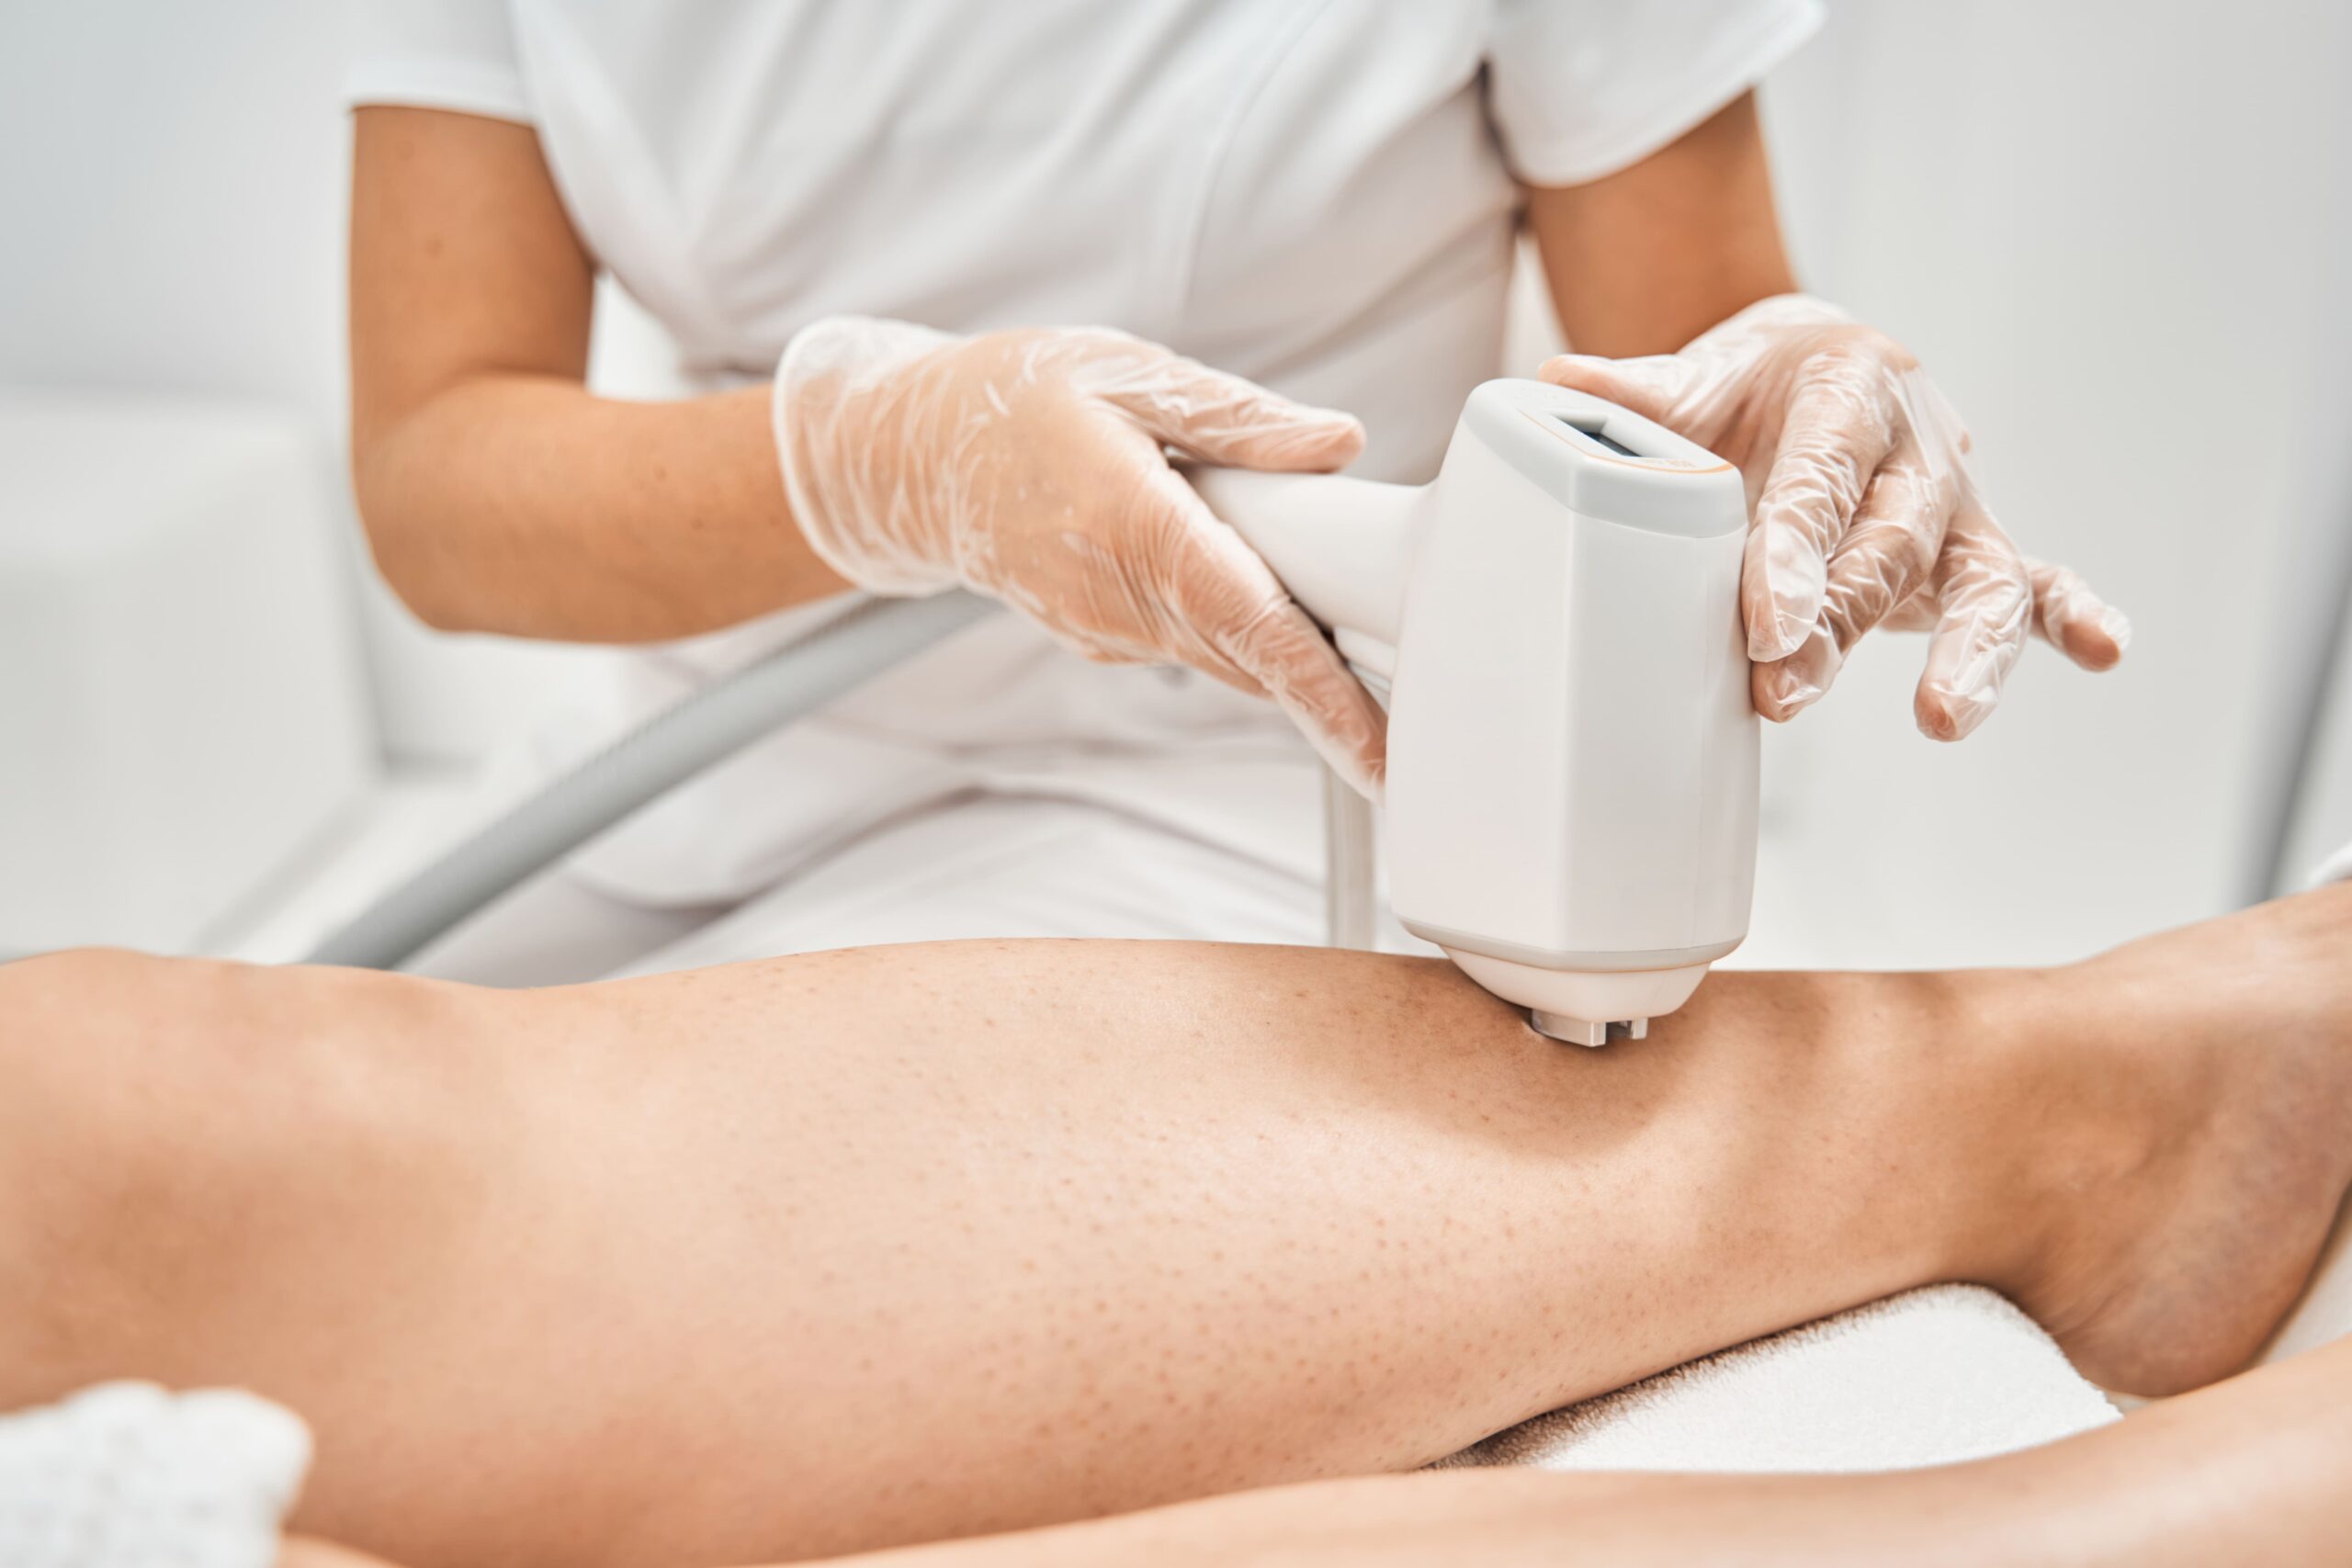 Sleek and Smooth: The Benefits of Laser Hair Removal